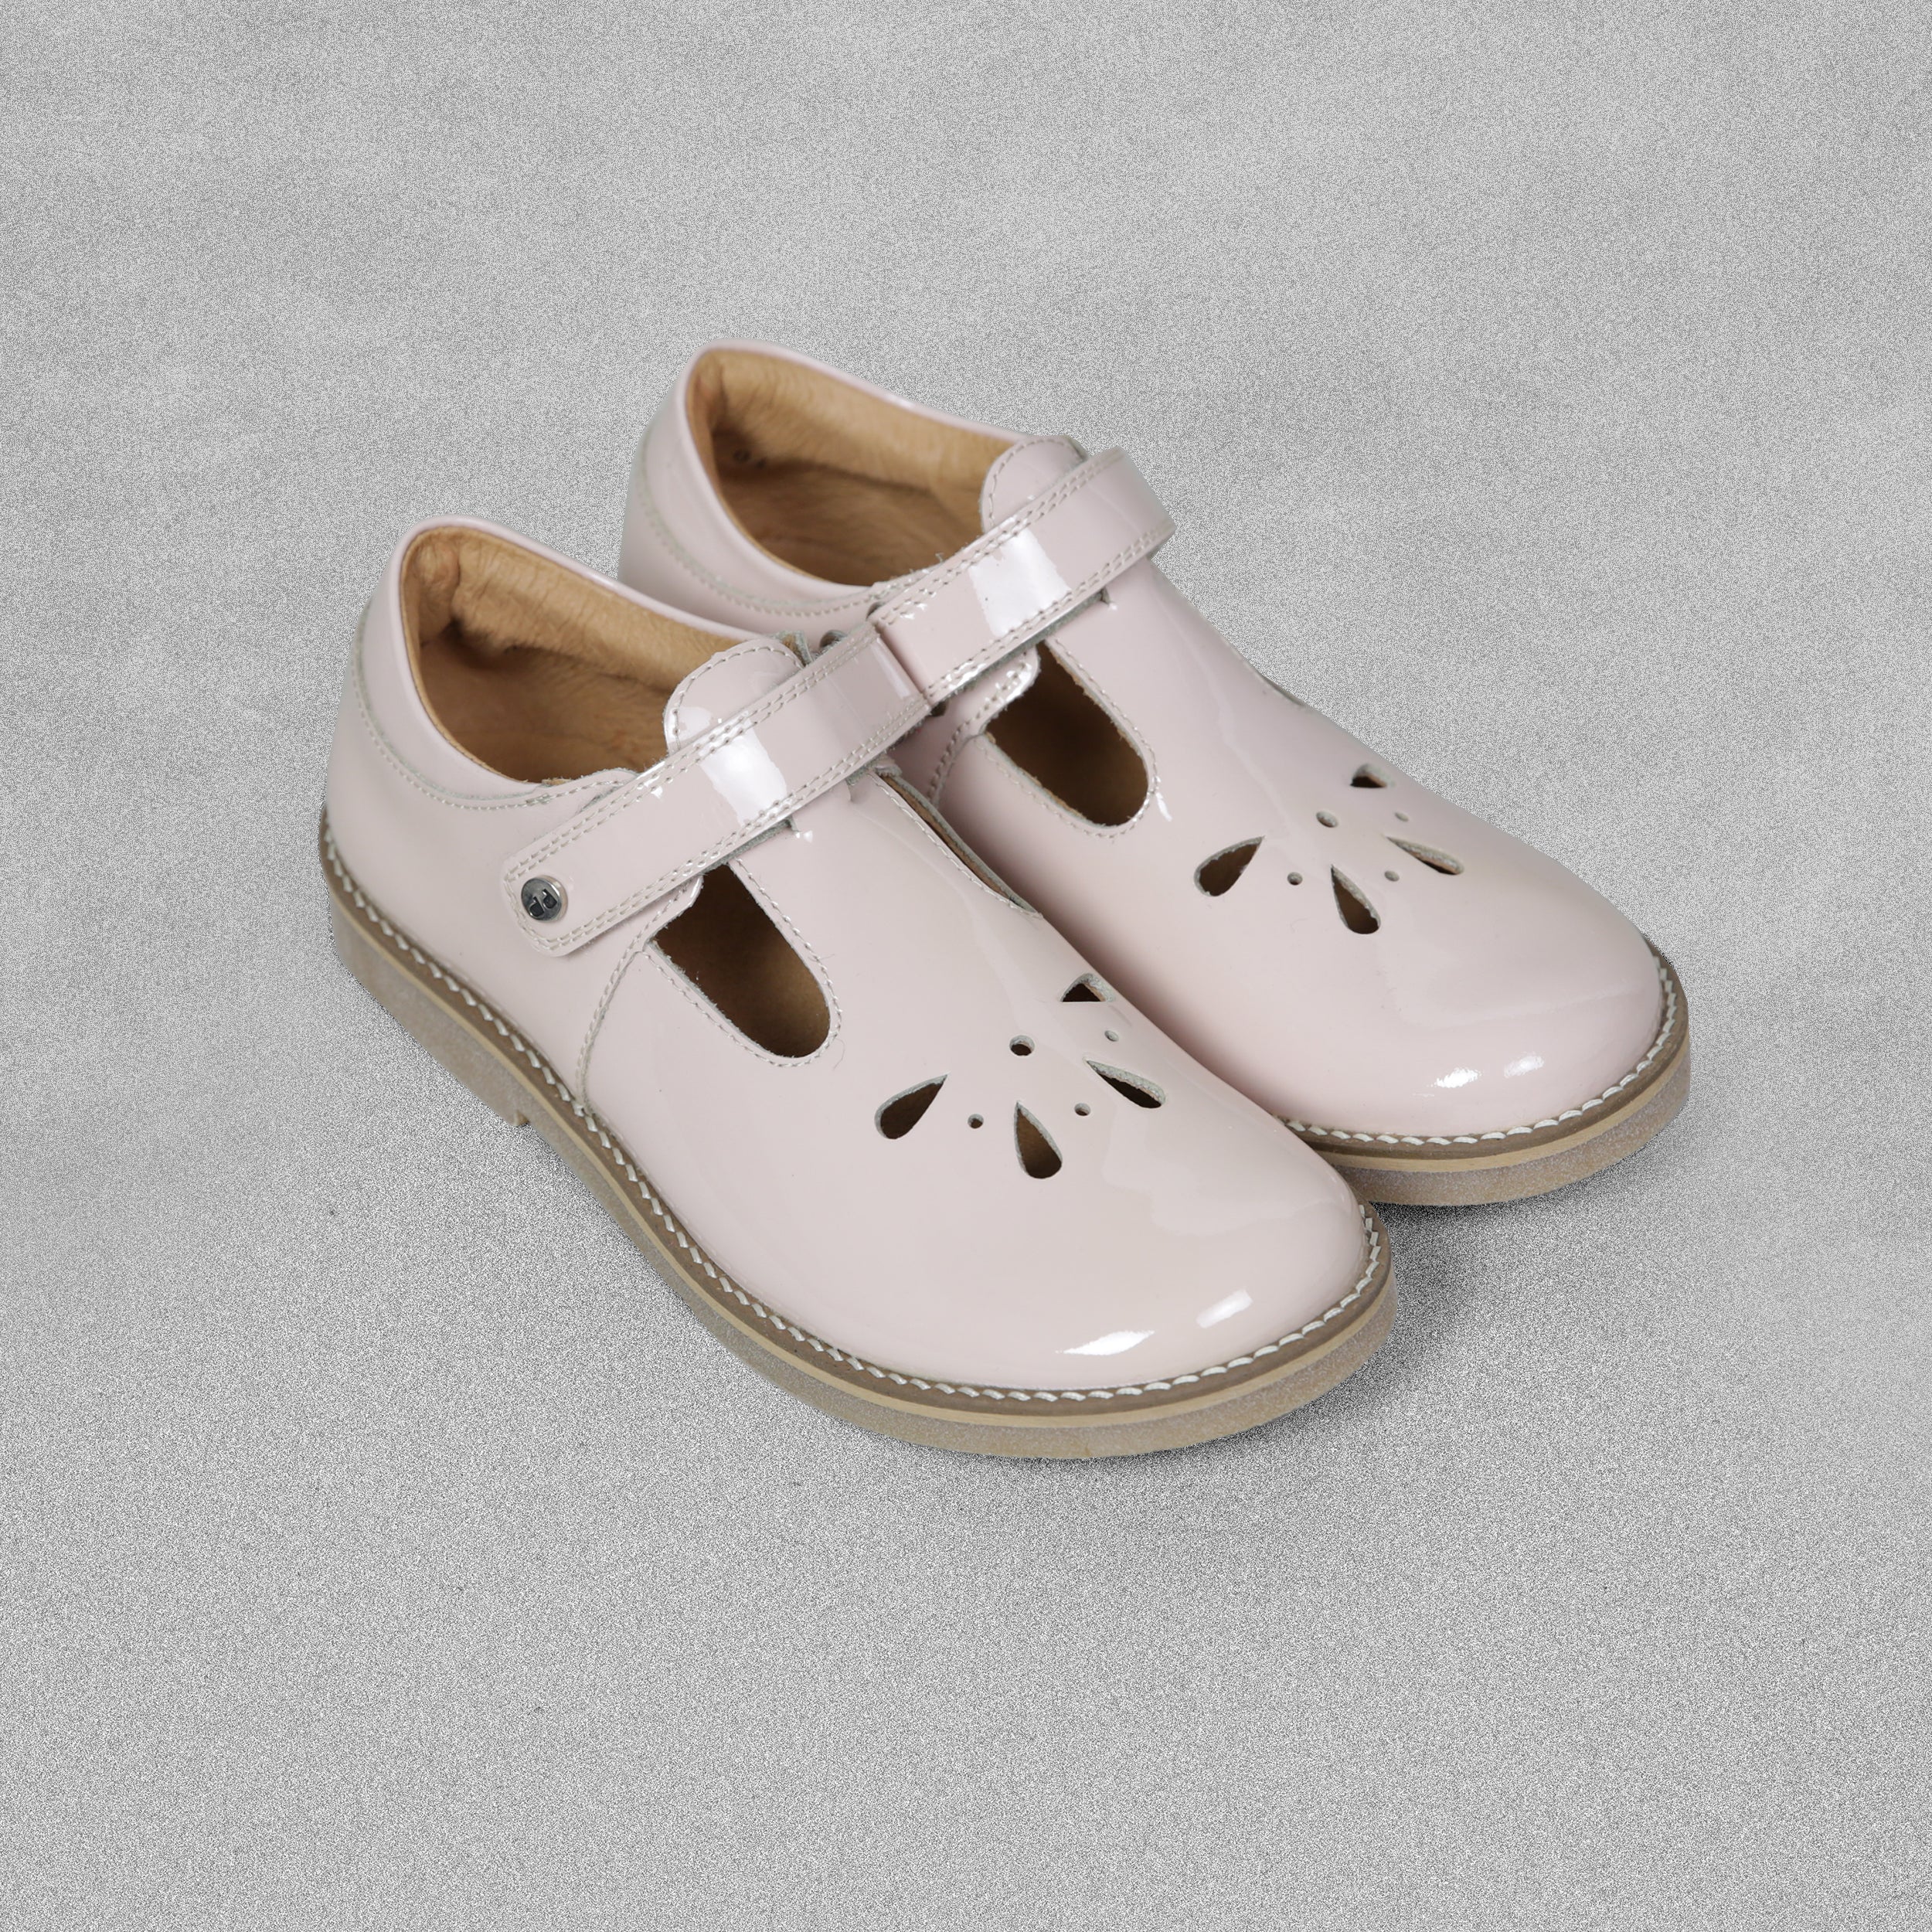 'Froddo' Nude Leather Shoes with T-Bar Velcro Strap - EU33